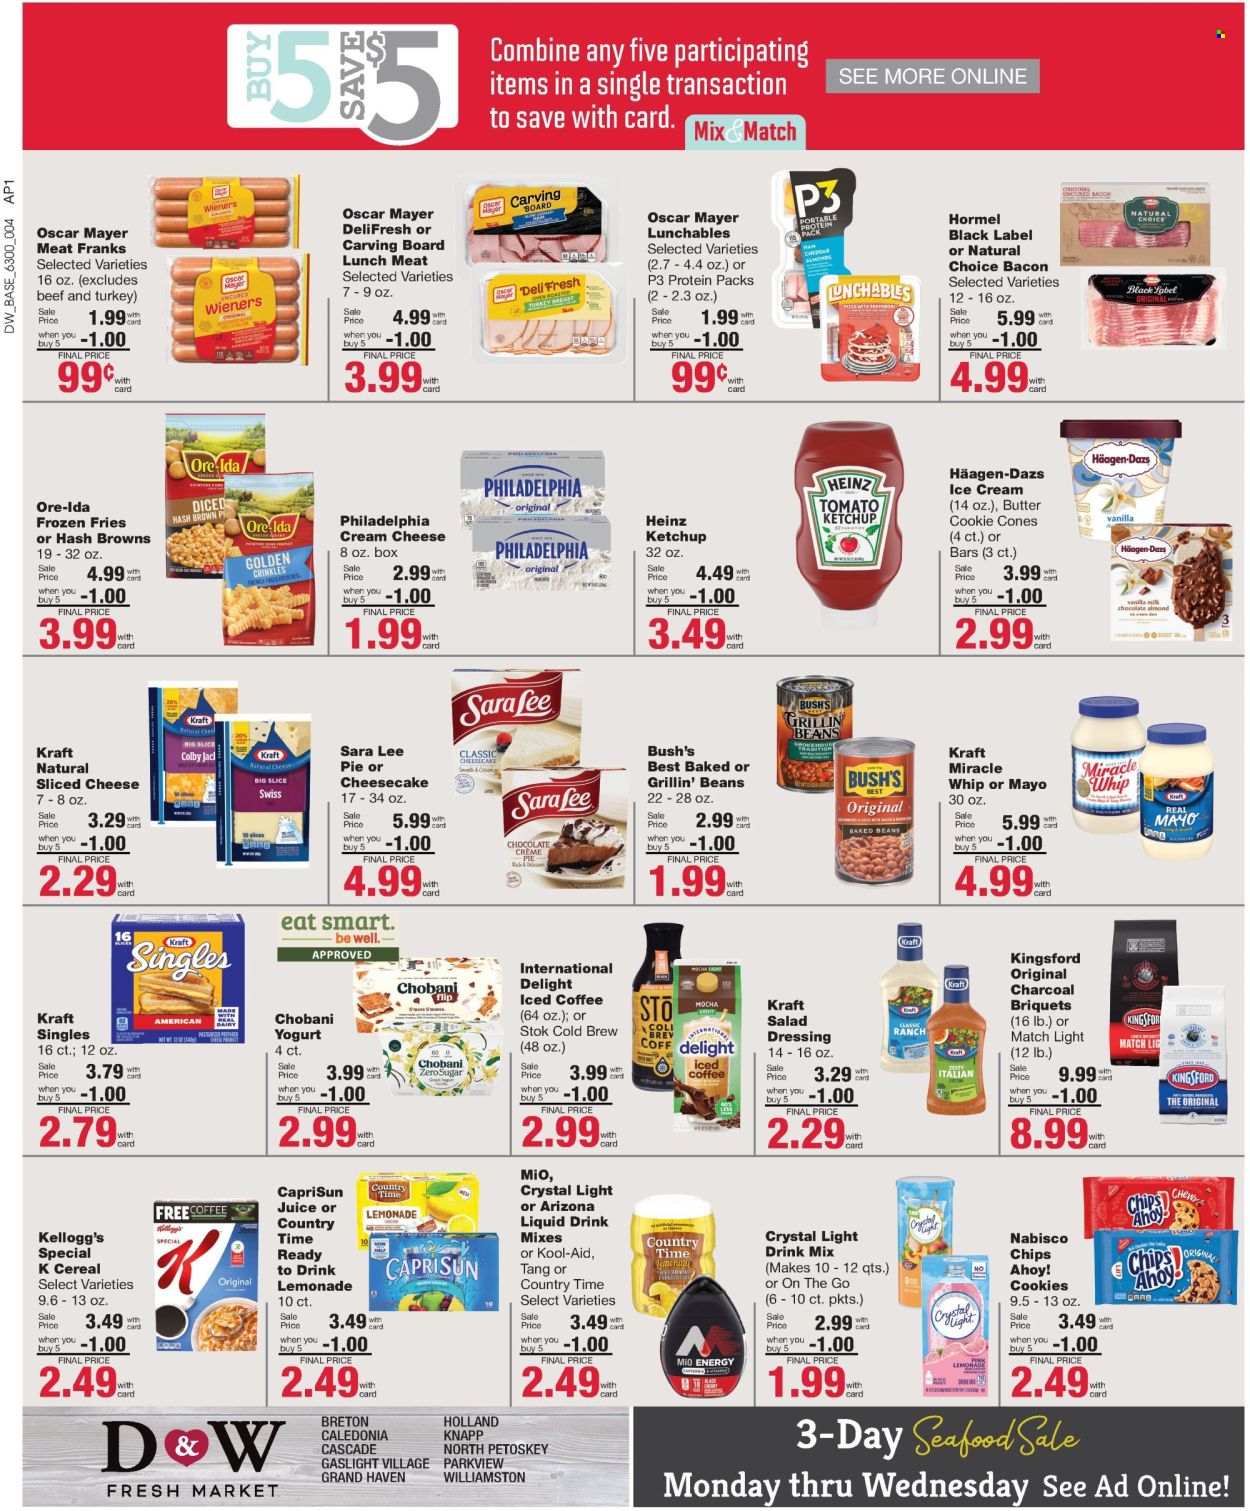 thumbnail - D&W Fresh Market Flyer - 06/30/2024 - 07/06/2024 - Sales products - Sara Lee, seafood, pizza, snack, Lunchables, Kraft®, Hormel, Kingsford, ready meal, Oscar Mayer, frankfurters, lunch meat, Colby cheese, cream cheese, sandwich slices, sliced cheese, Philadelphia, cheese, Kraft Singles, Chobani, mayonnaise, Miracle Whip, ice cream, Häagen-Dazs, ice cones, hash browns, potato fries, Ore-Ida, Mars, Kellogg's, Chips Ahoy!, Nabisco, Heinz, baked beans, corn flakes, salad dressing, ketchup, dressing, almonds, lemonade, juice, fruit drink, AriZona, Country Time, iced coffee, powder drink, coffee drink, Cascade, dietary supplement, vitamins. Page 2.